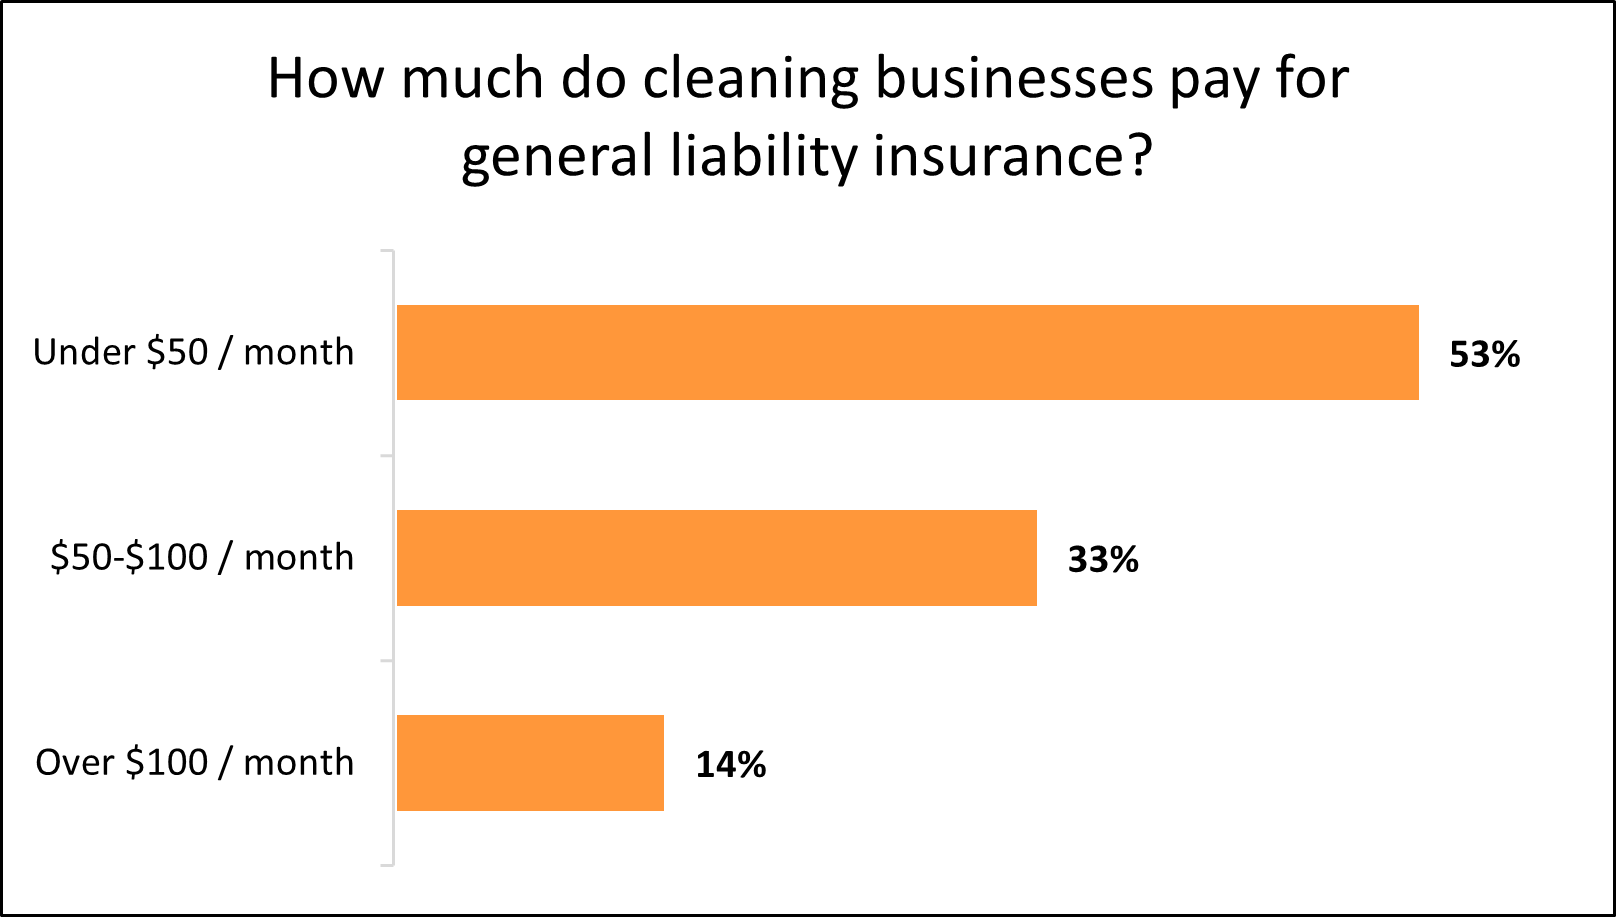 Average monthly cost of general liability insurance for cleaning businesses.